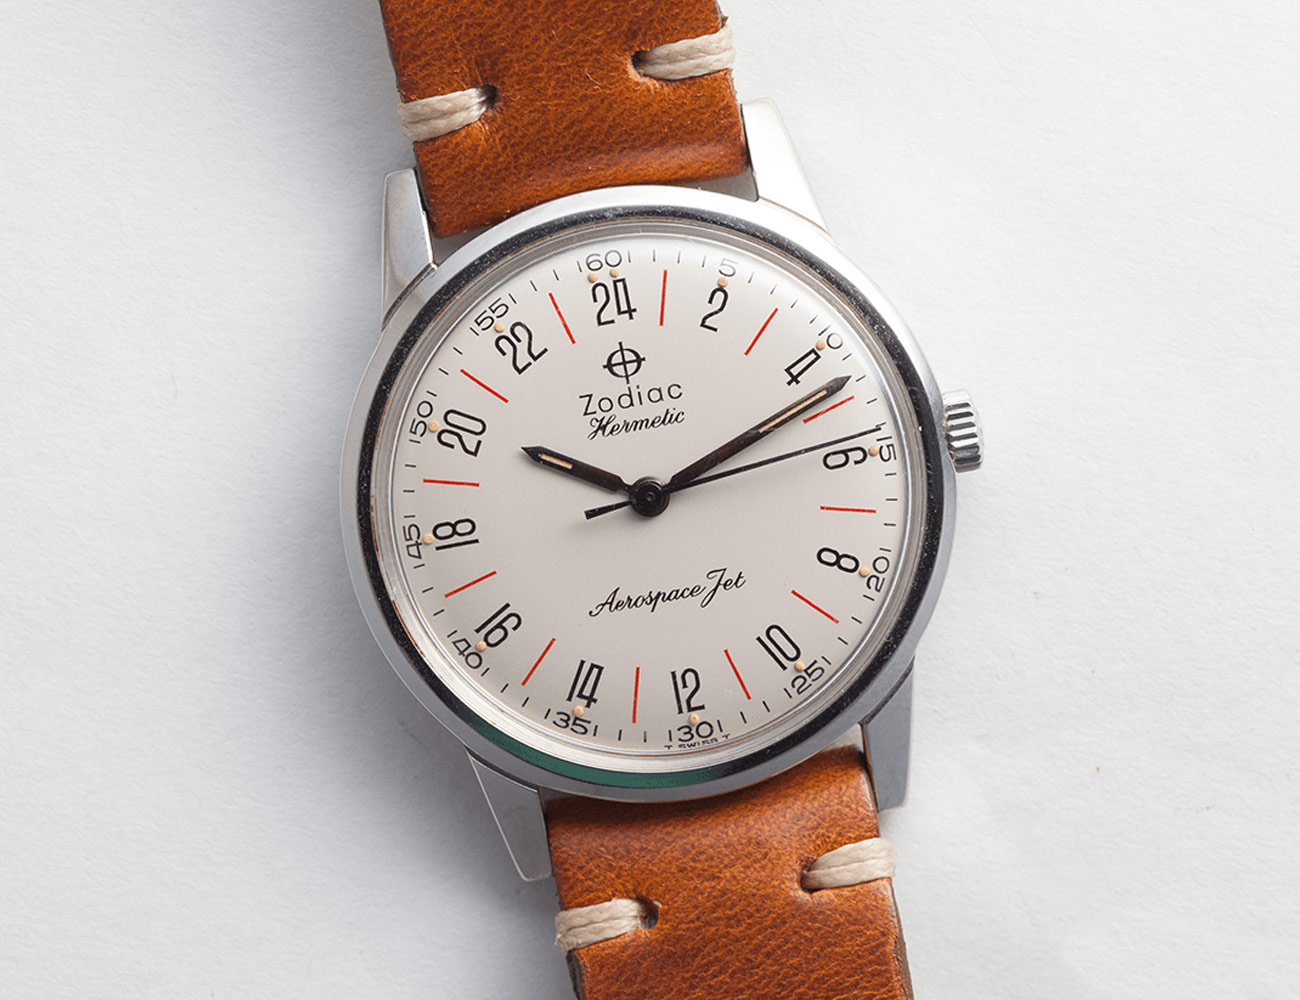 Analog Watch 24 Hour Dial Moxalite